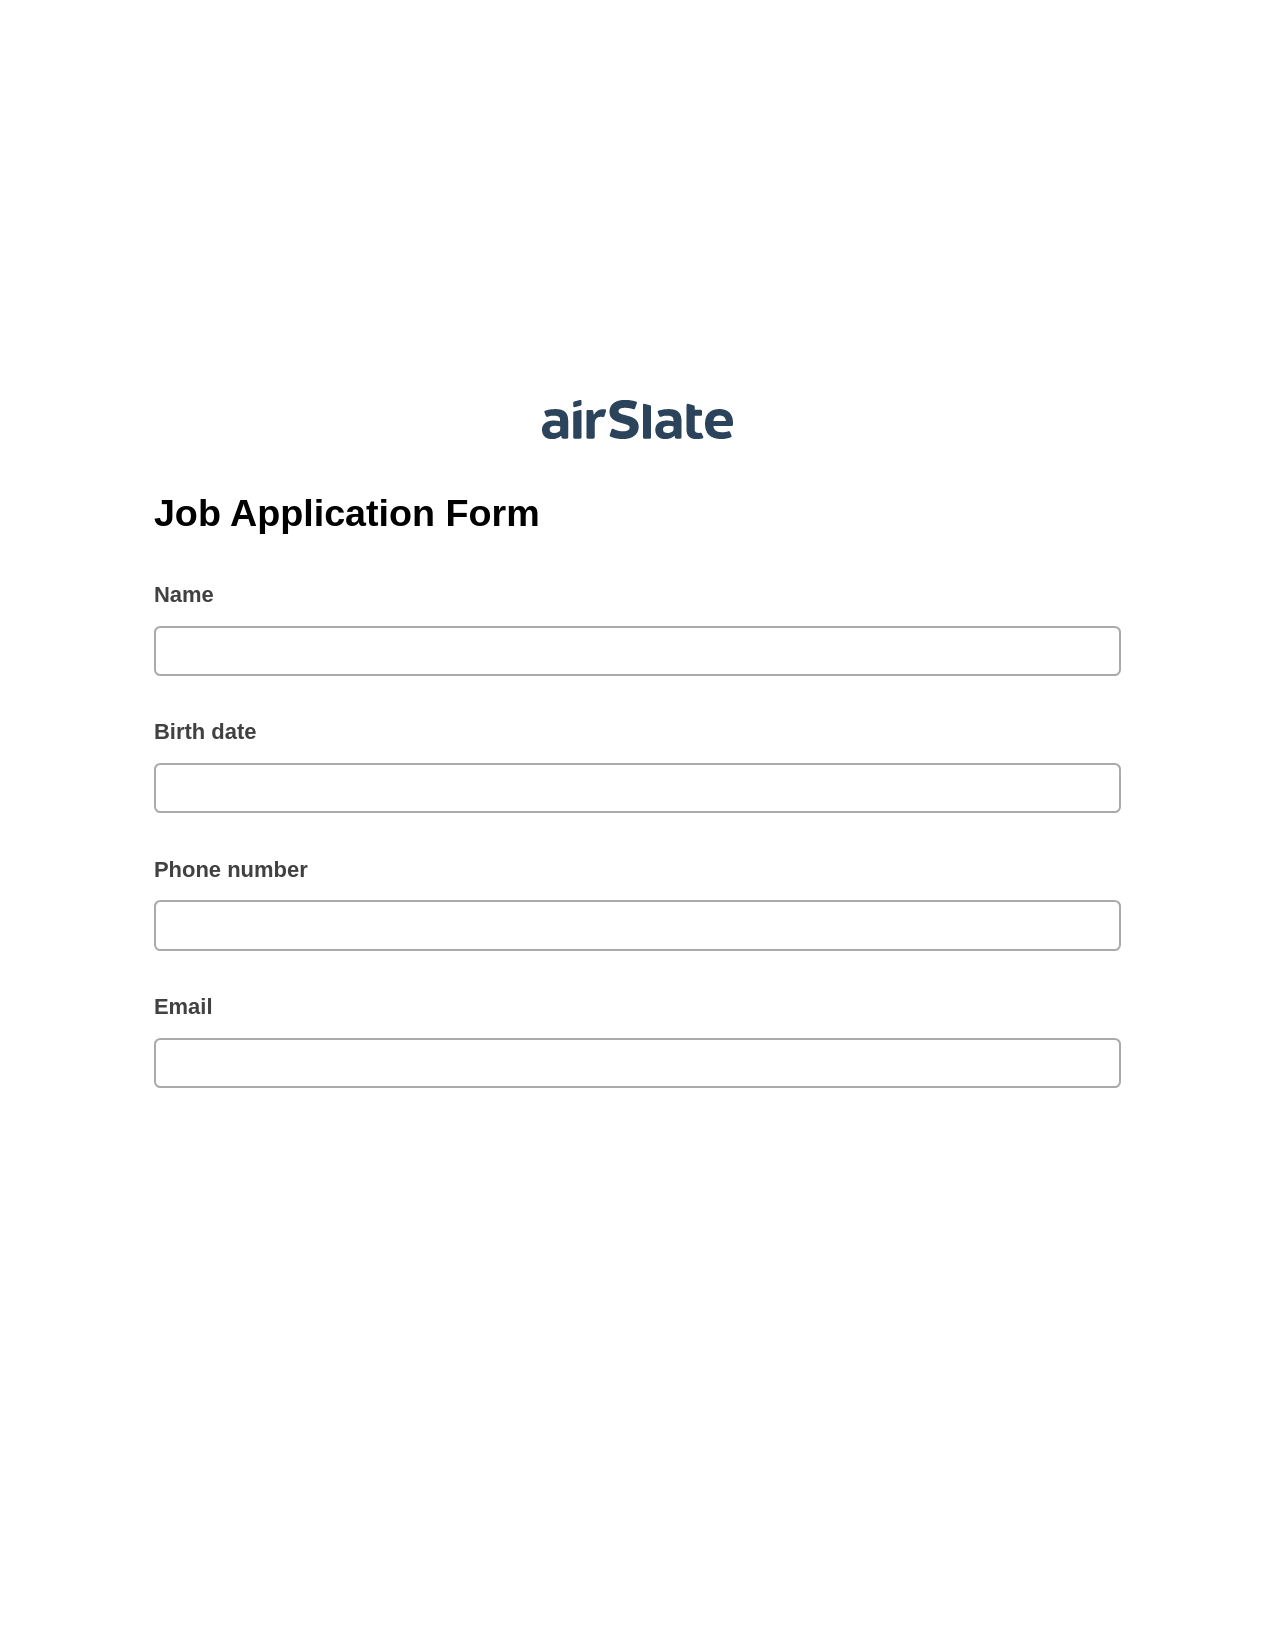 Multirole Job Application Form Pre-fill from Salesforce Record Bot, Slack Notification Bot, Export to Formstack Documents Bot